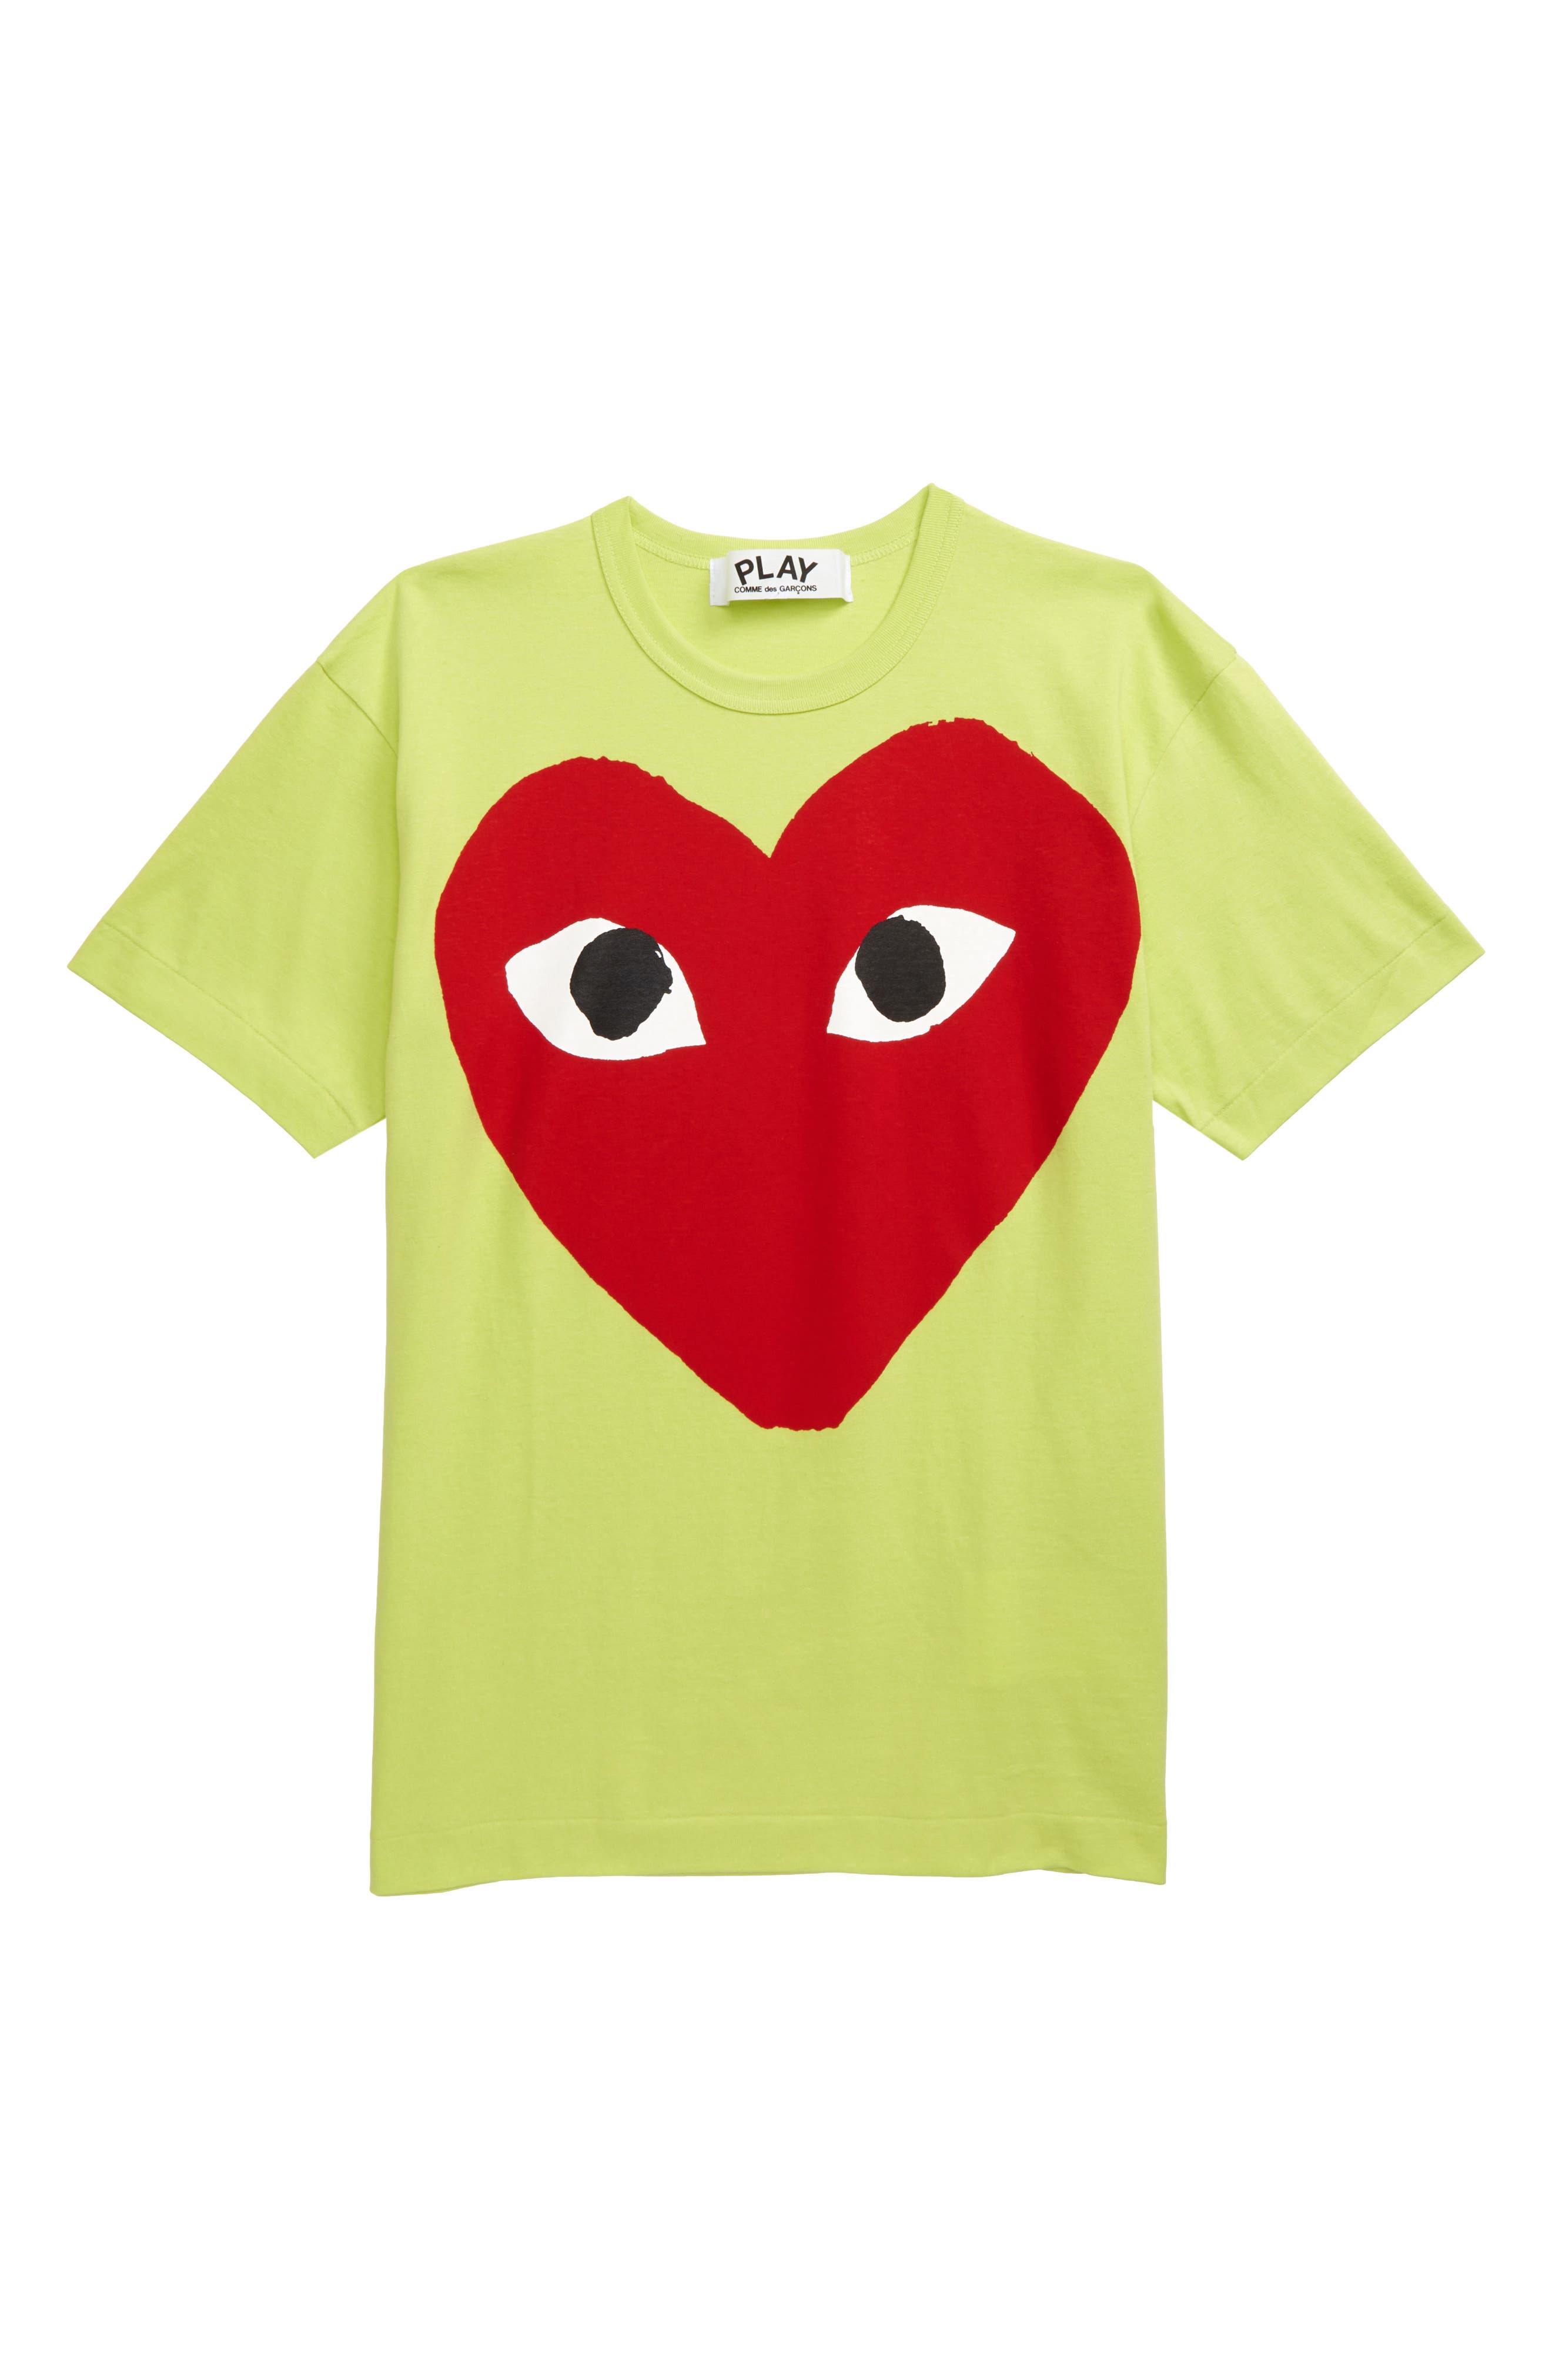 green and red graphic tee